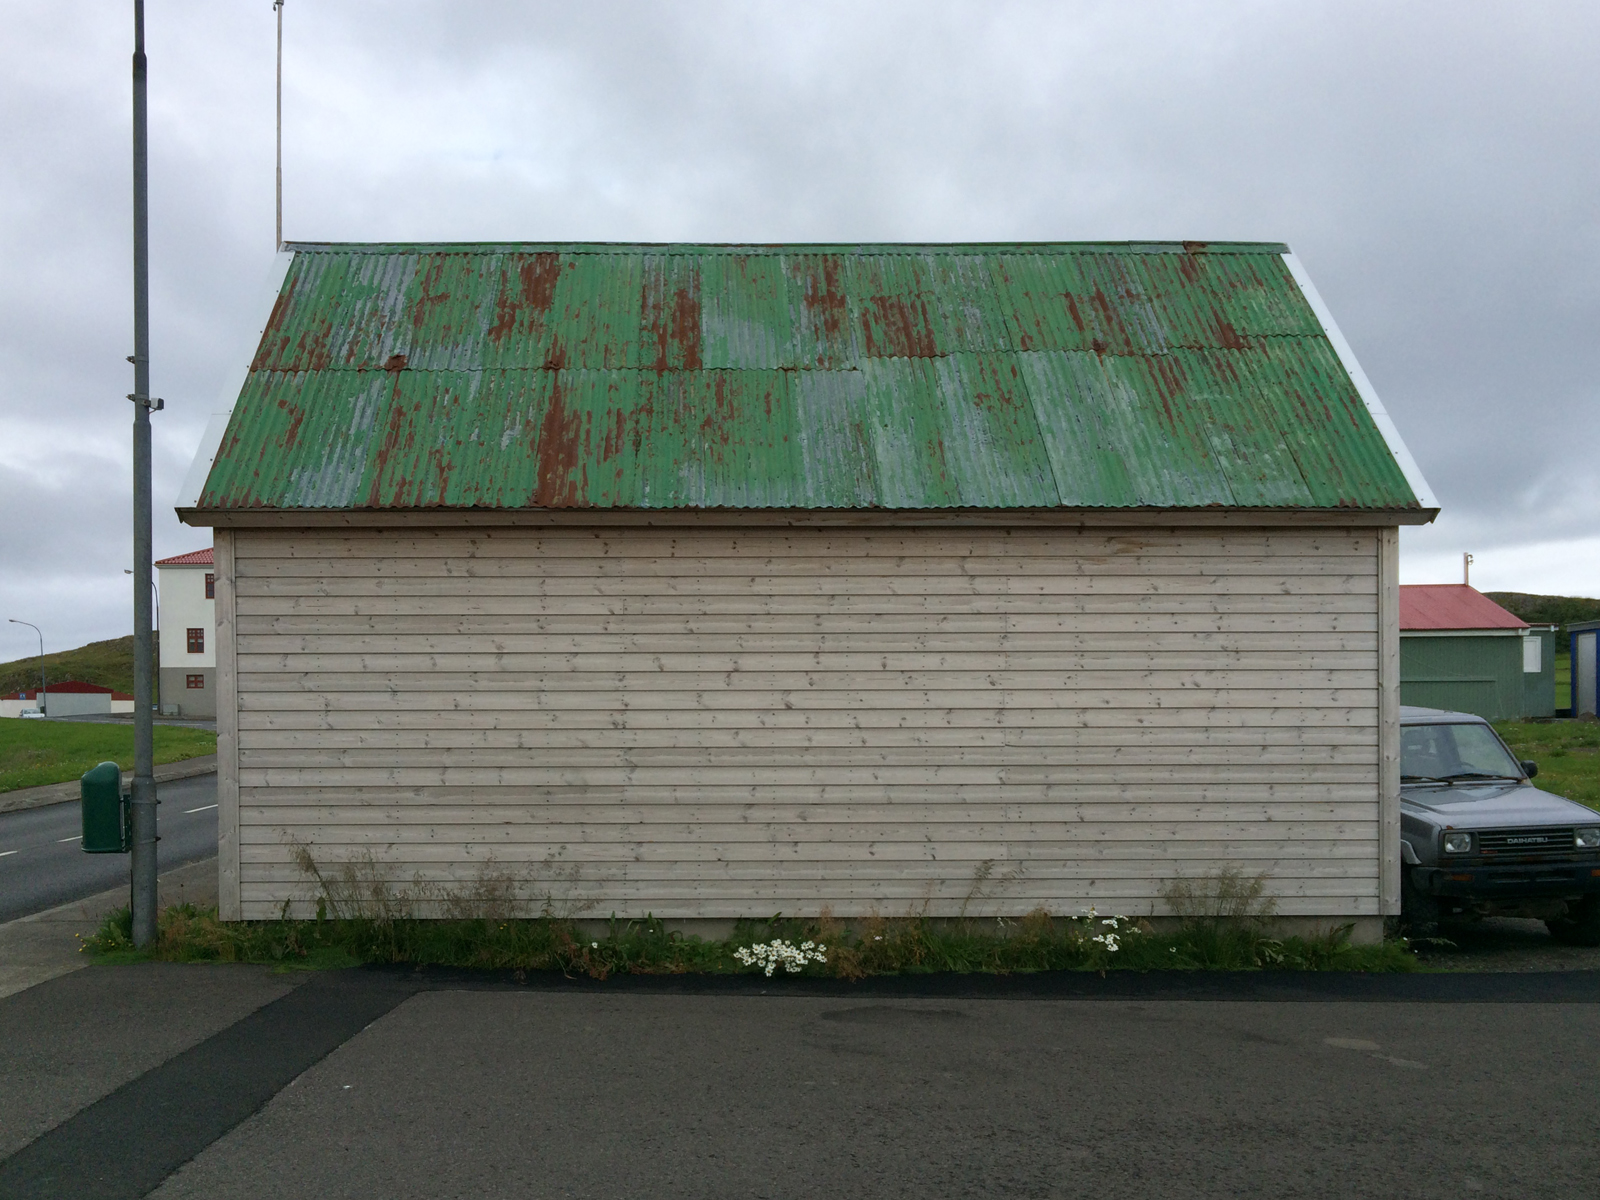 A windowless wall of a white clapboard building with a rusted green metal roof.